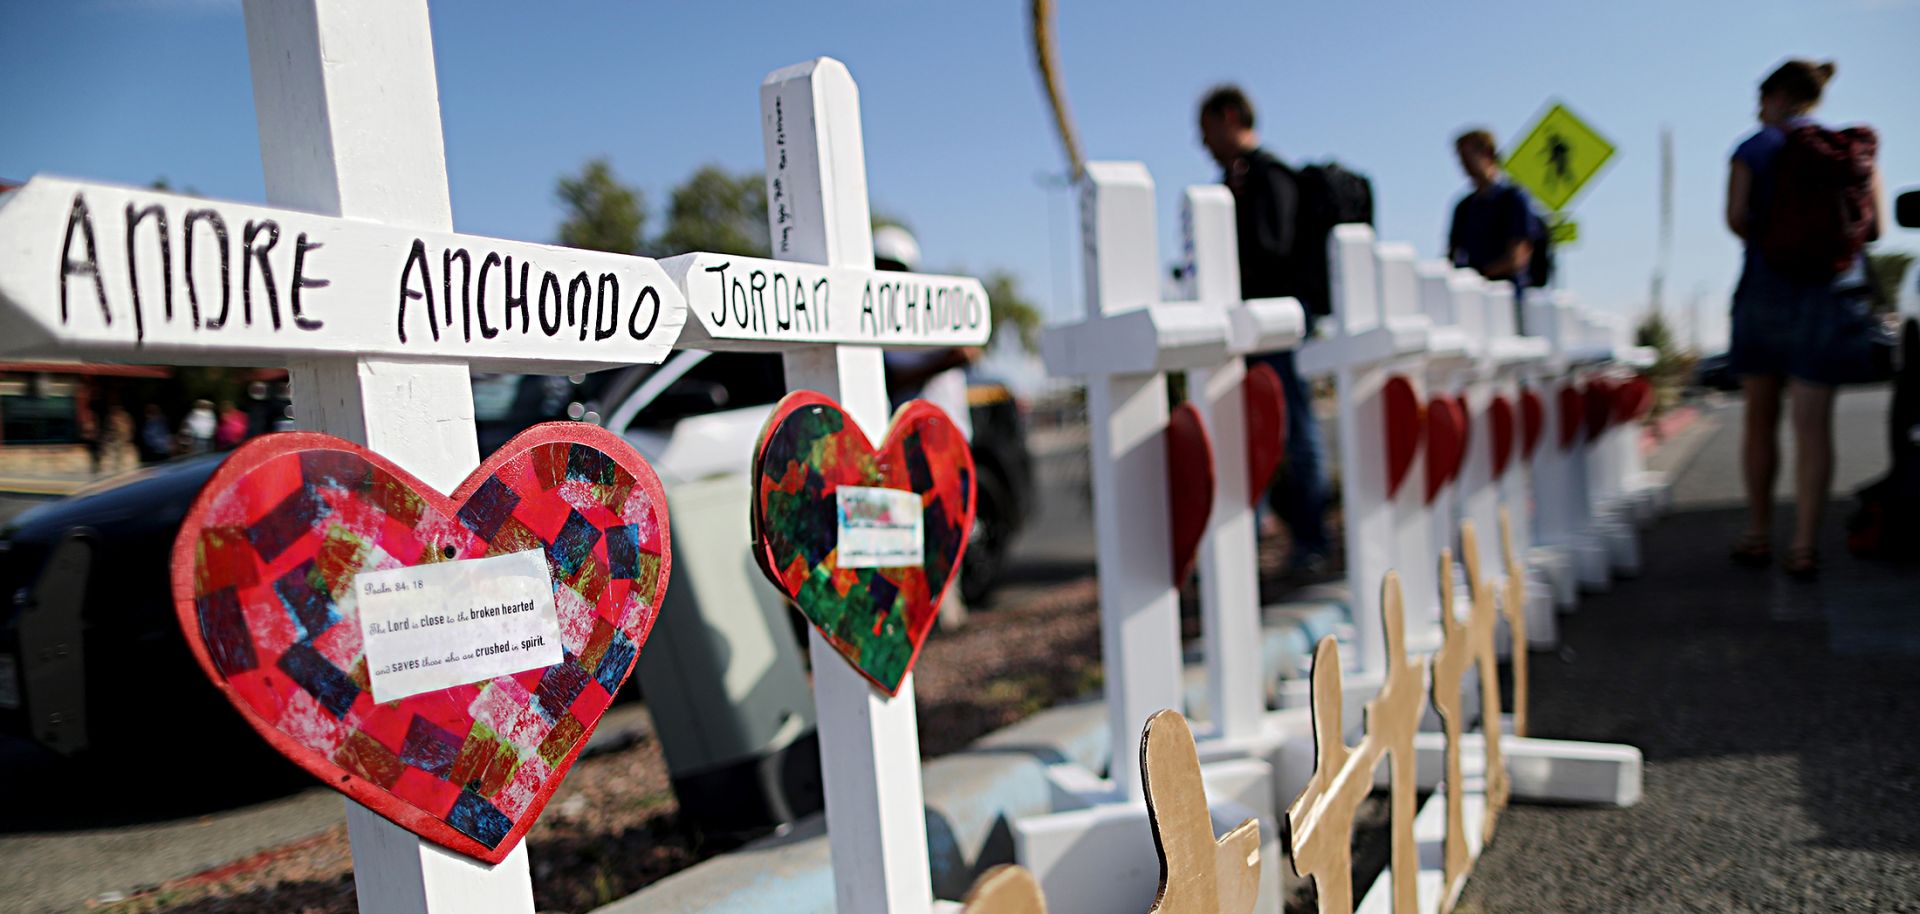 Handmade crosses memorialize the victims of a mass shooting in El Paso, Texas, on Aug. 5, 2019.